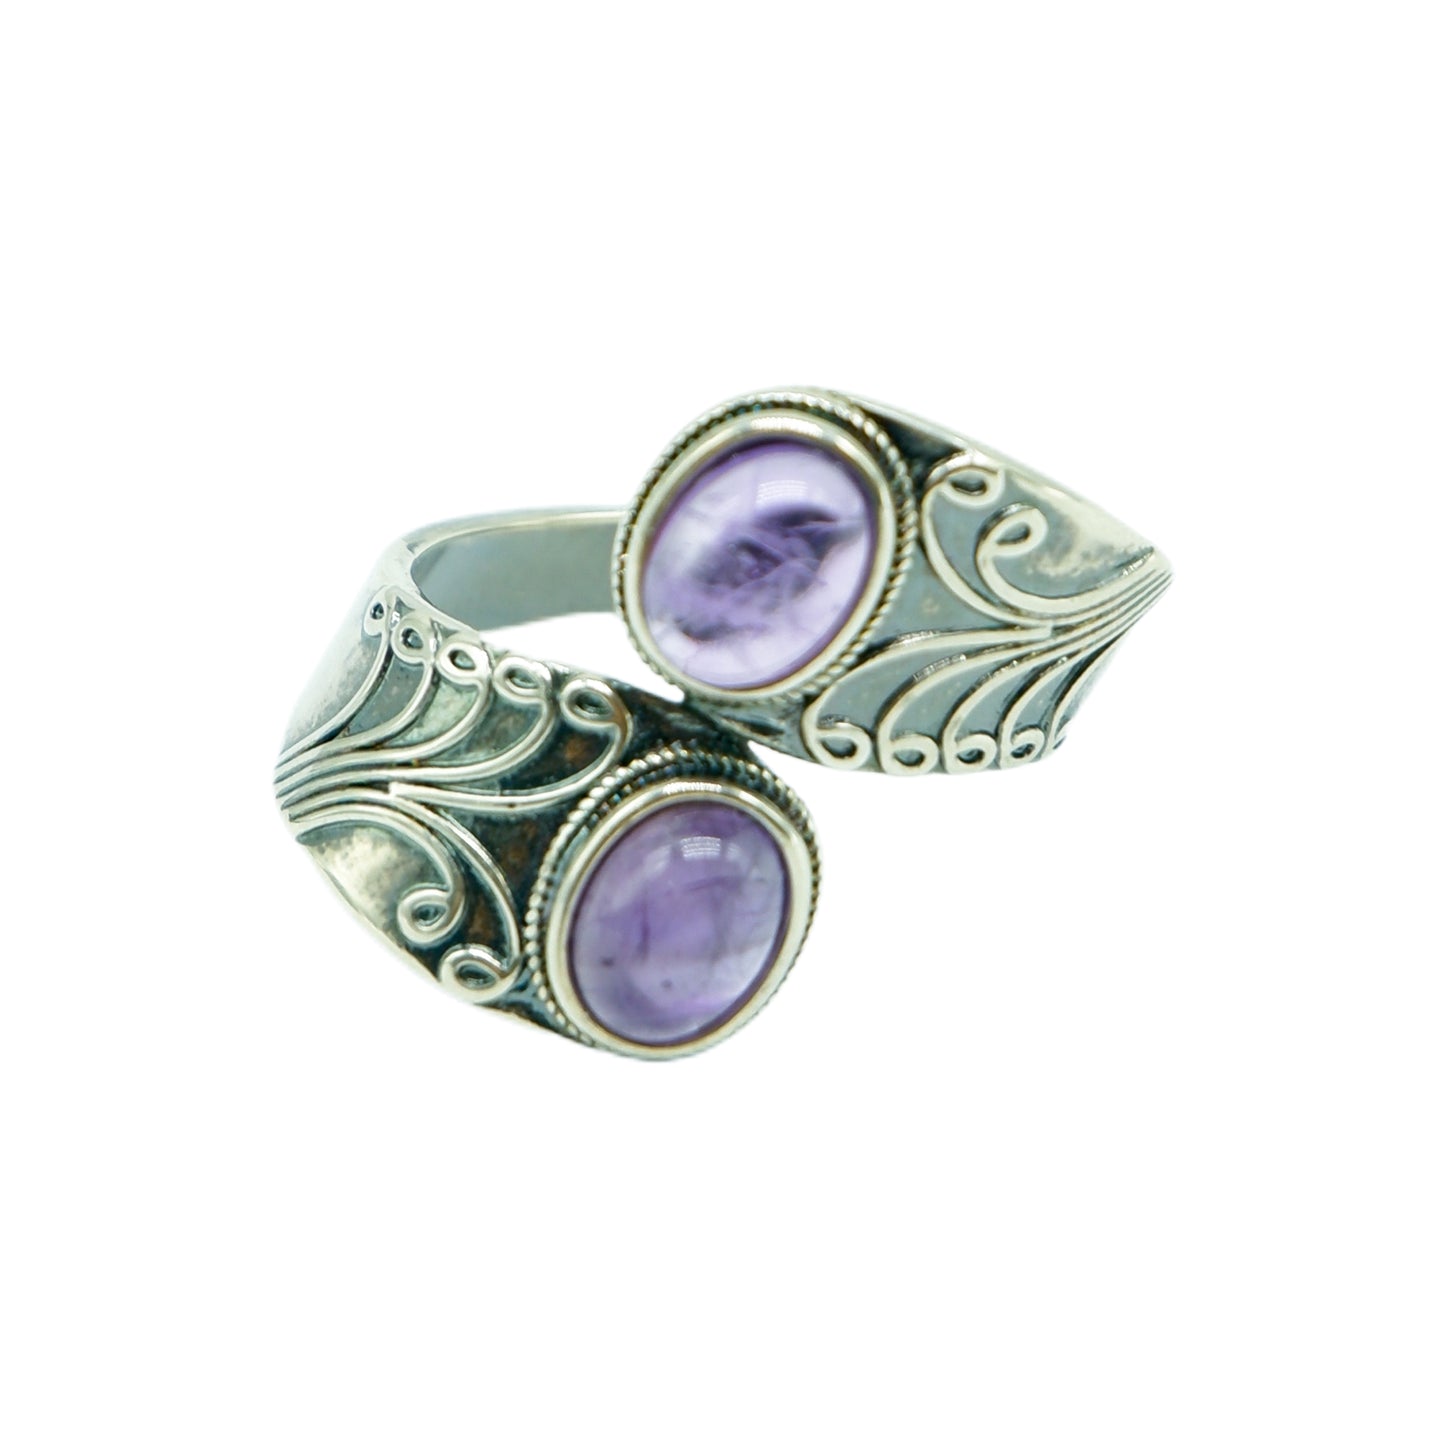 Vintage Amethyst Silver Ring Calming • Intuition • Spirituality